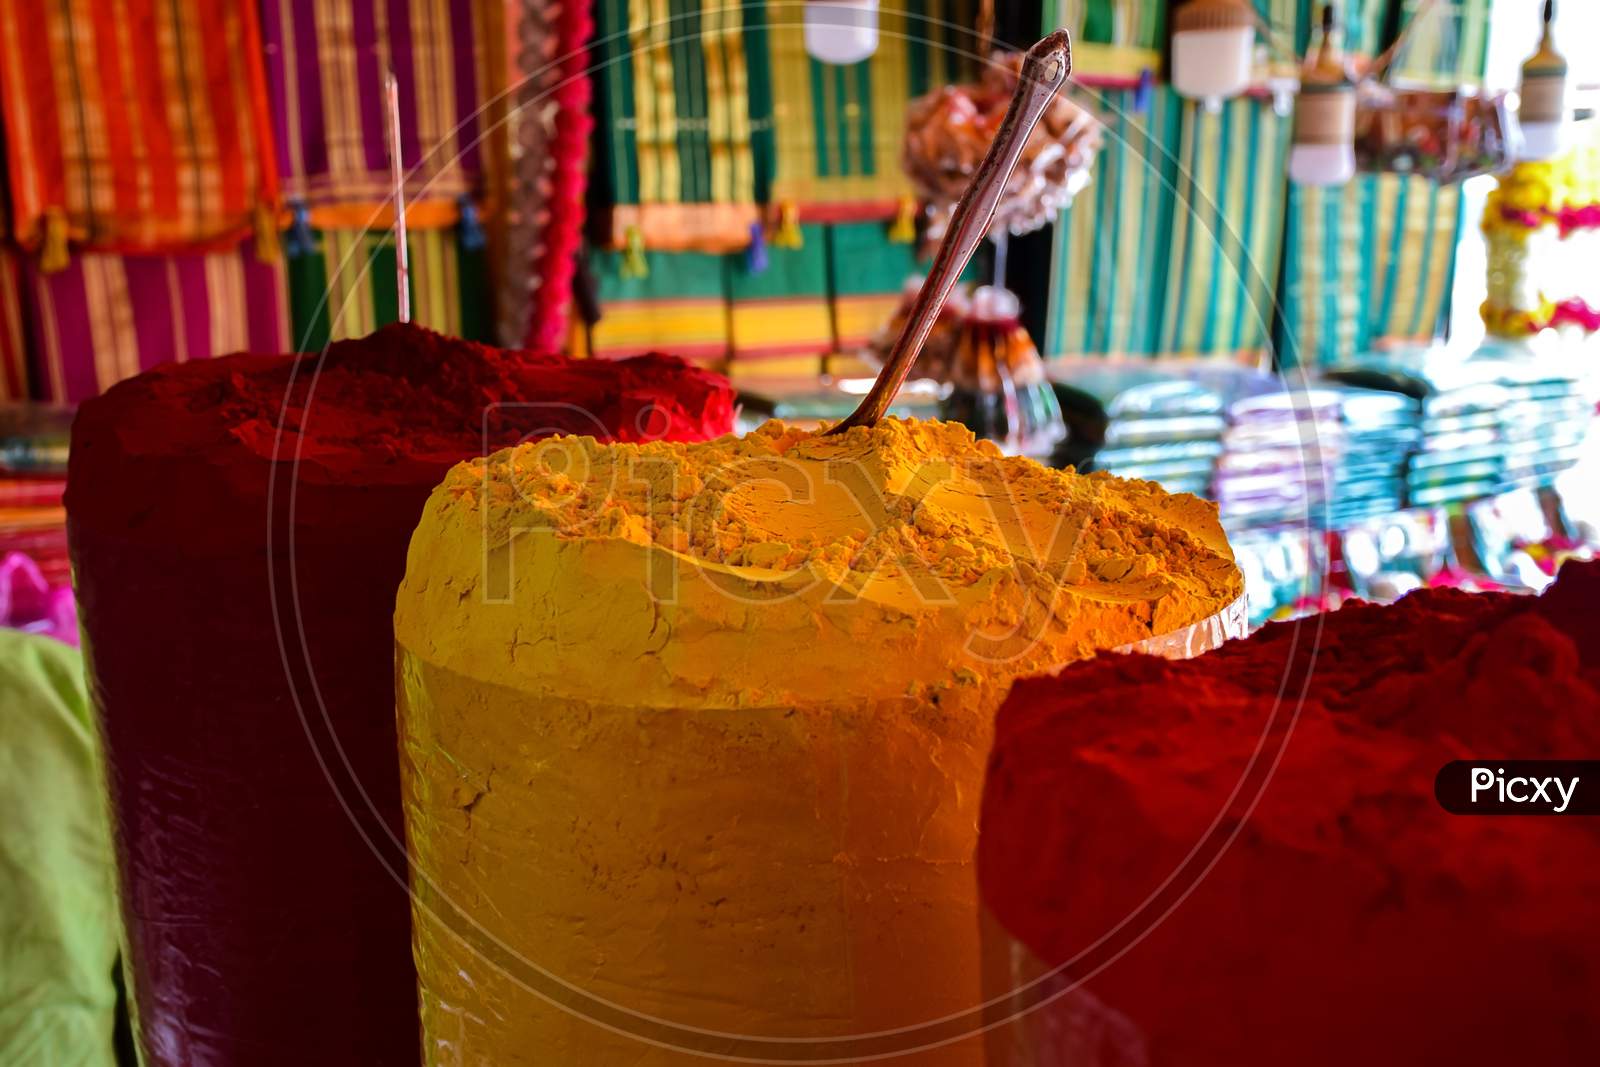 Stock Photo Of Vermillion Or Red Powder And Turmeric Powder Kept In Street Shop Outside Hindu Temple For Sale At Tuljapur, Maharashtra India.